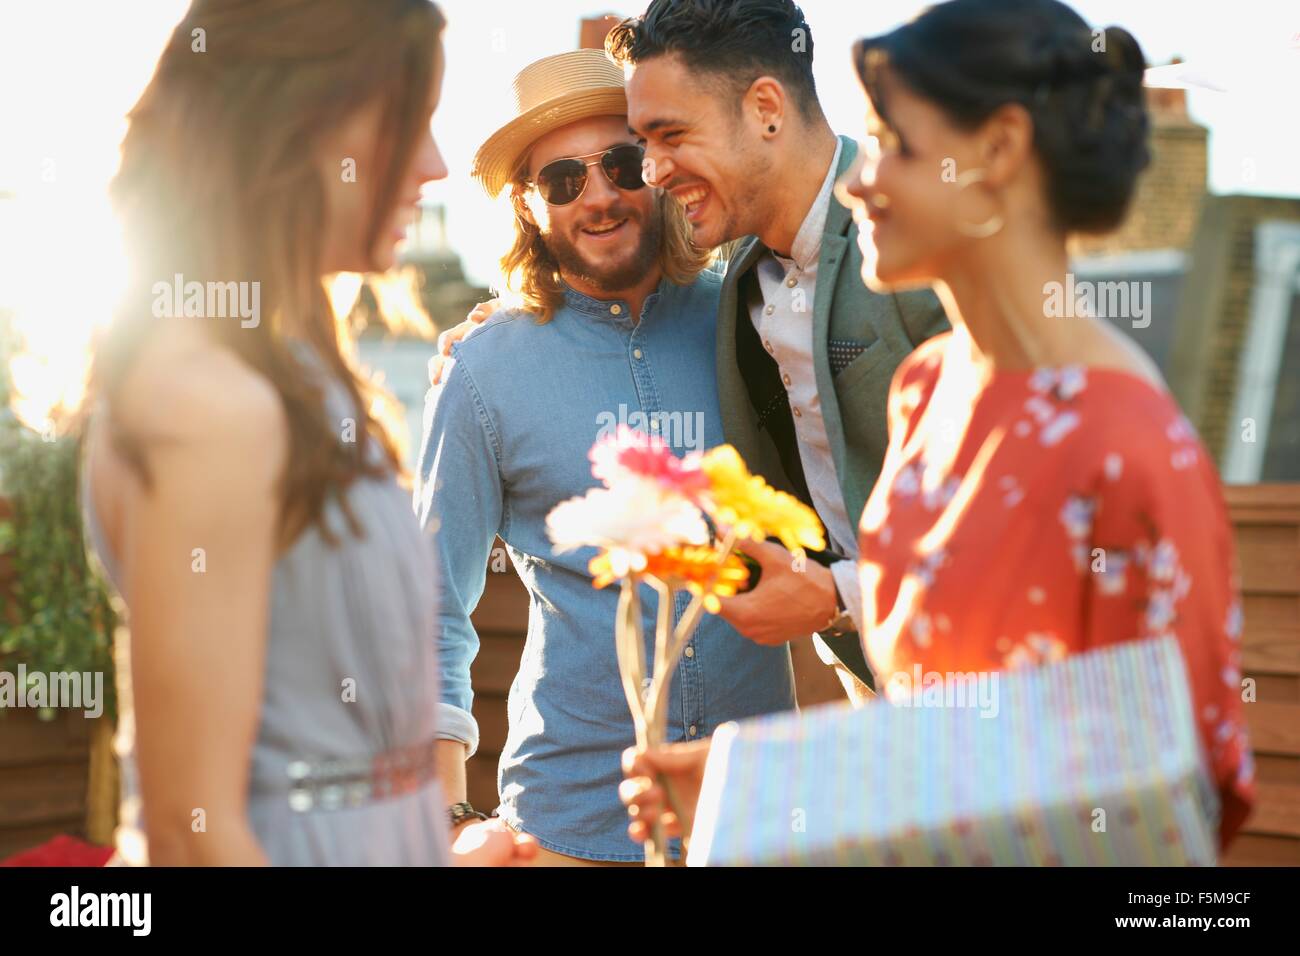 Friends at party on roof terrace holding flowers and gift smiling Stock Photo